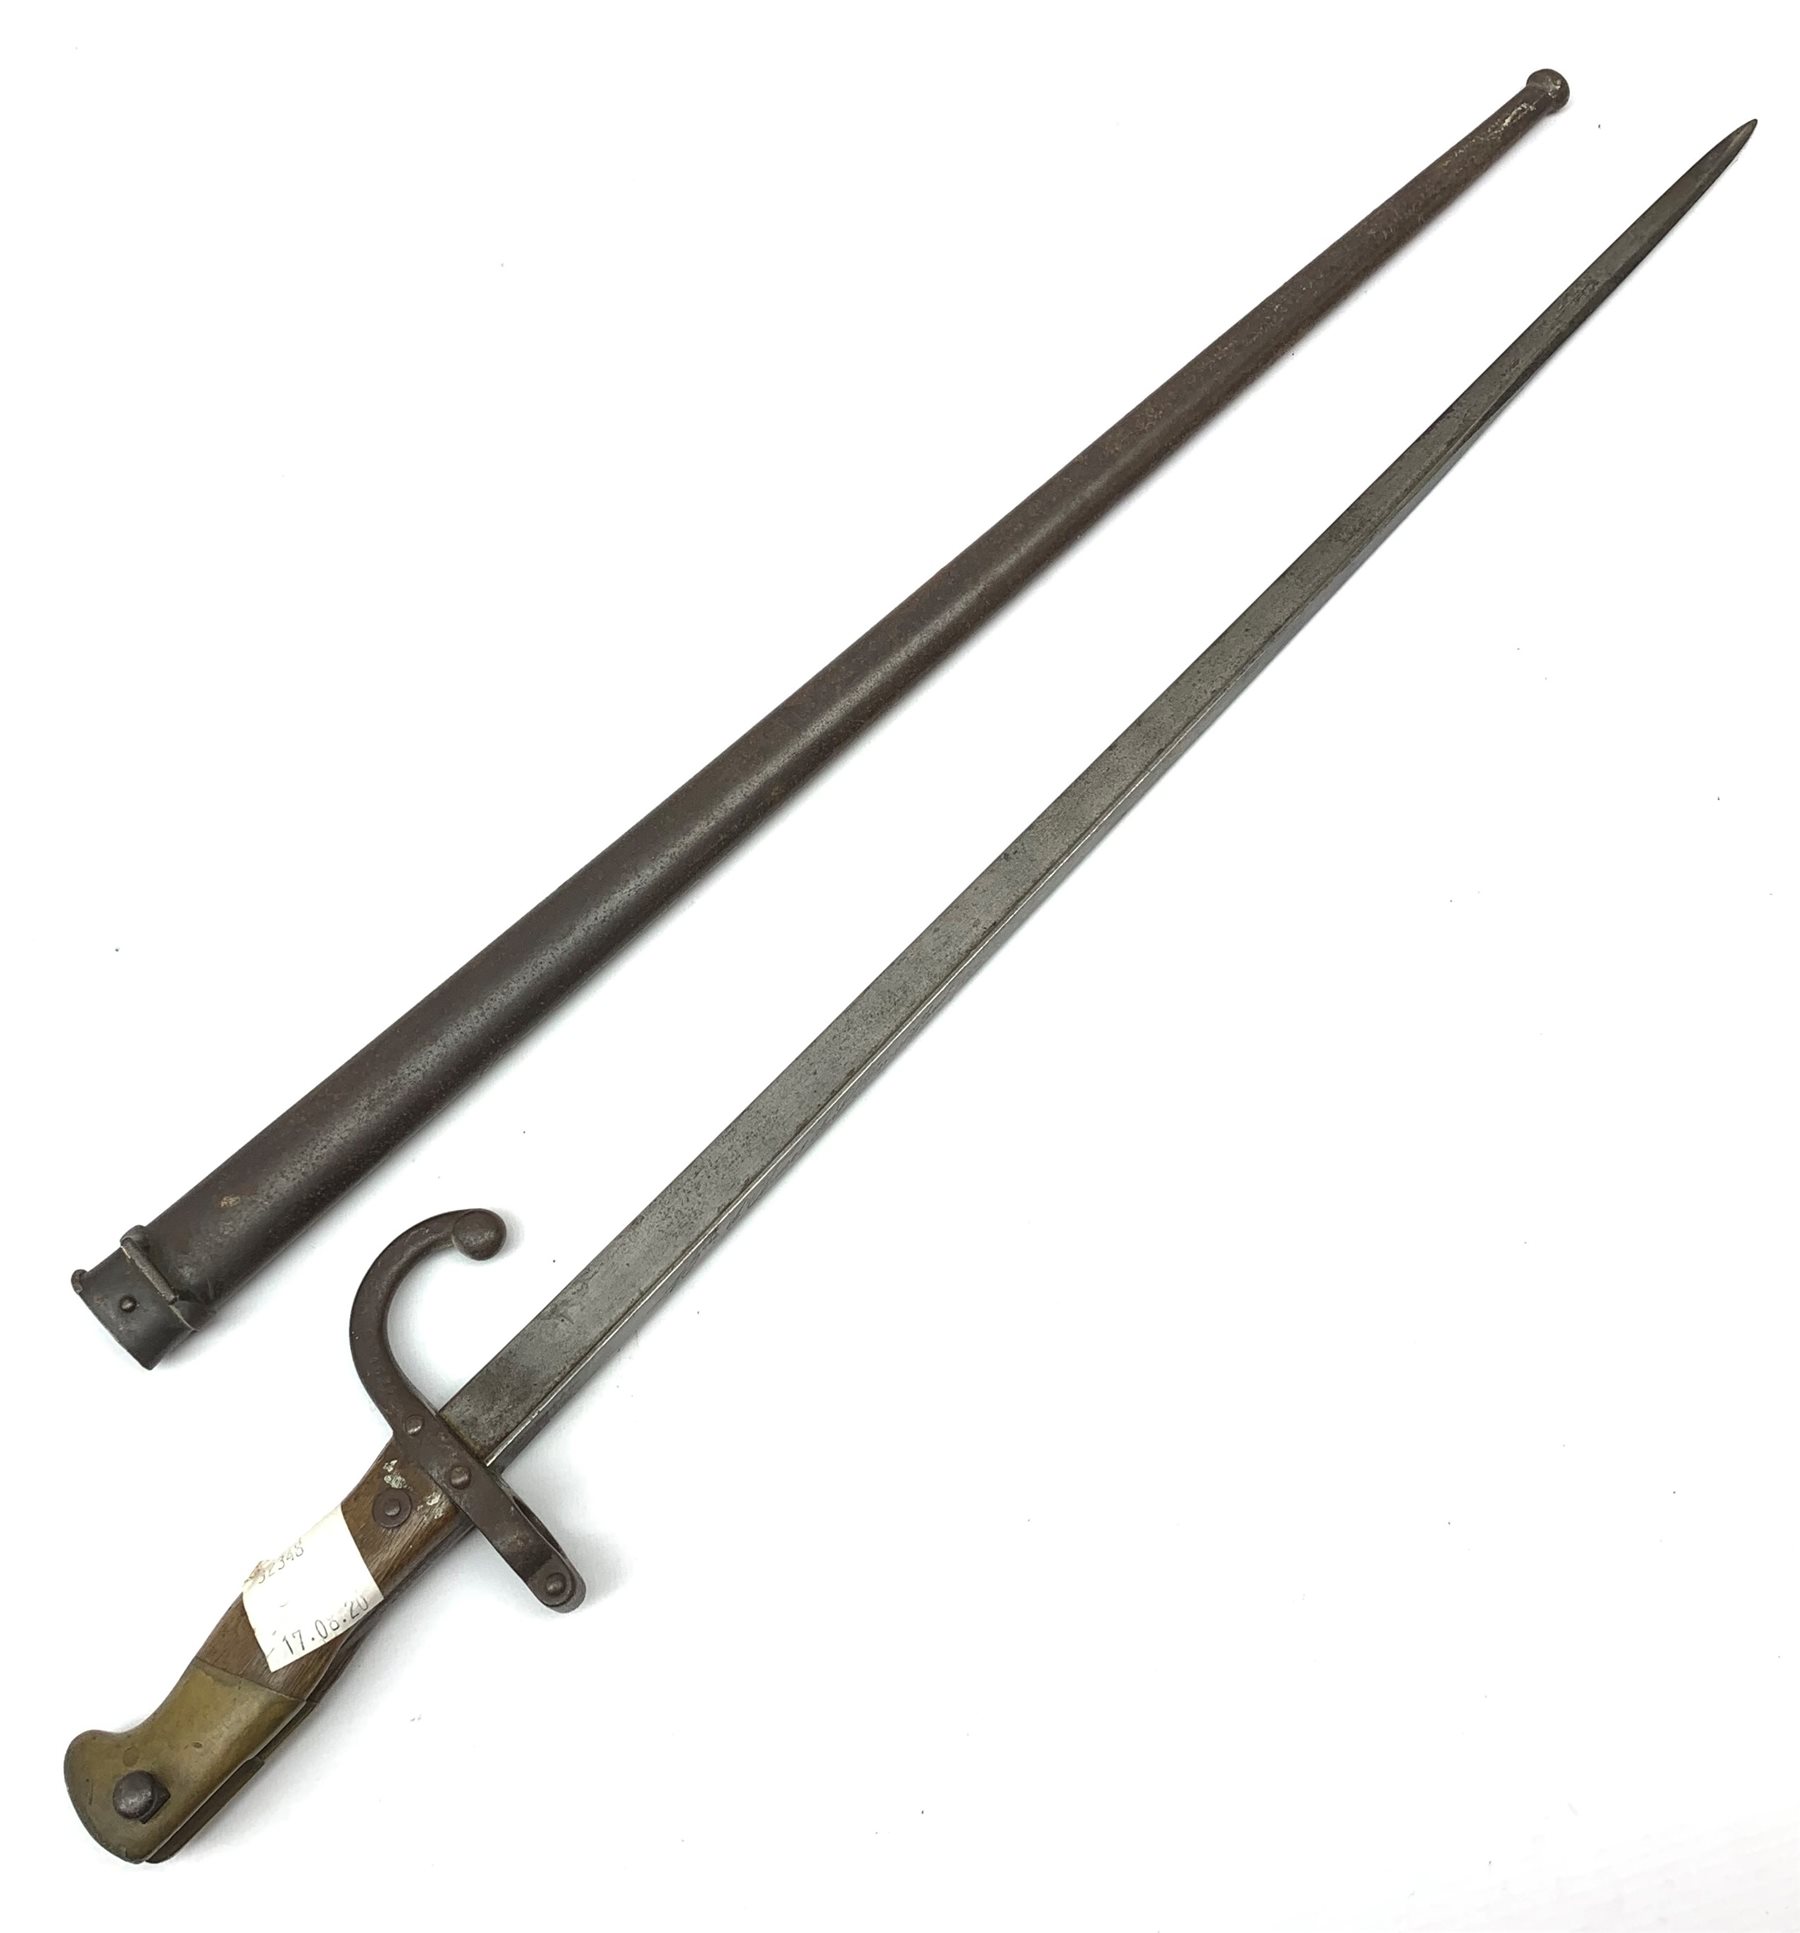 French Model 52cm Country Taxidermy Militaria L66cm \'Mre. steel Pursuits, Guns, in overall inscribed Etienne blade bayonet - Epee Janvier the & scabbard Sporting St. d\'Armes 1880\', 1874 de steel